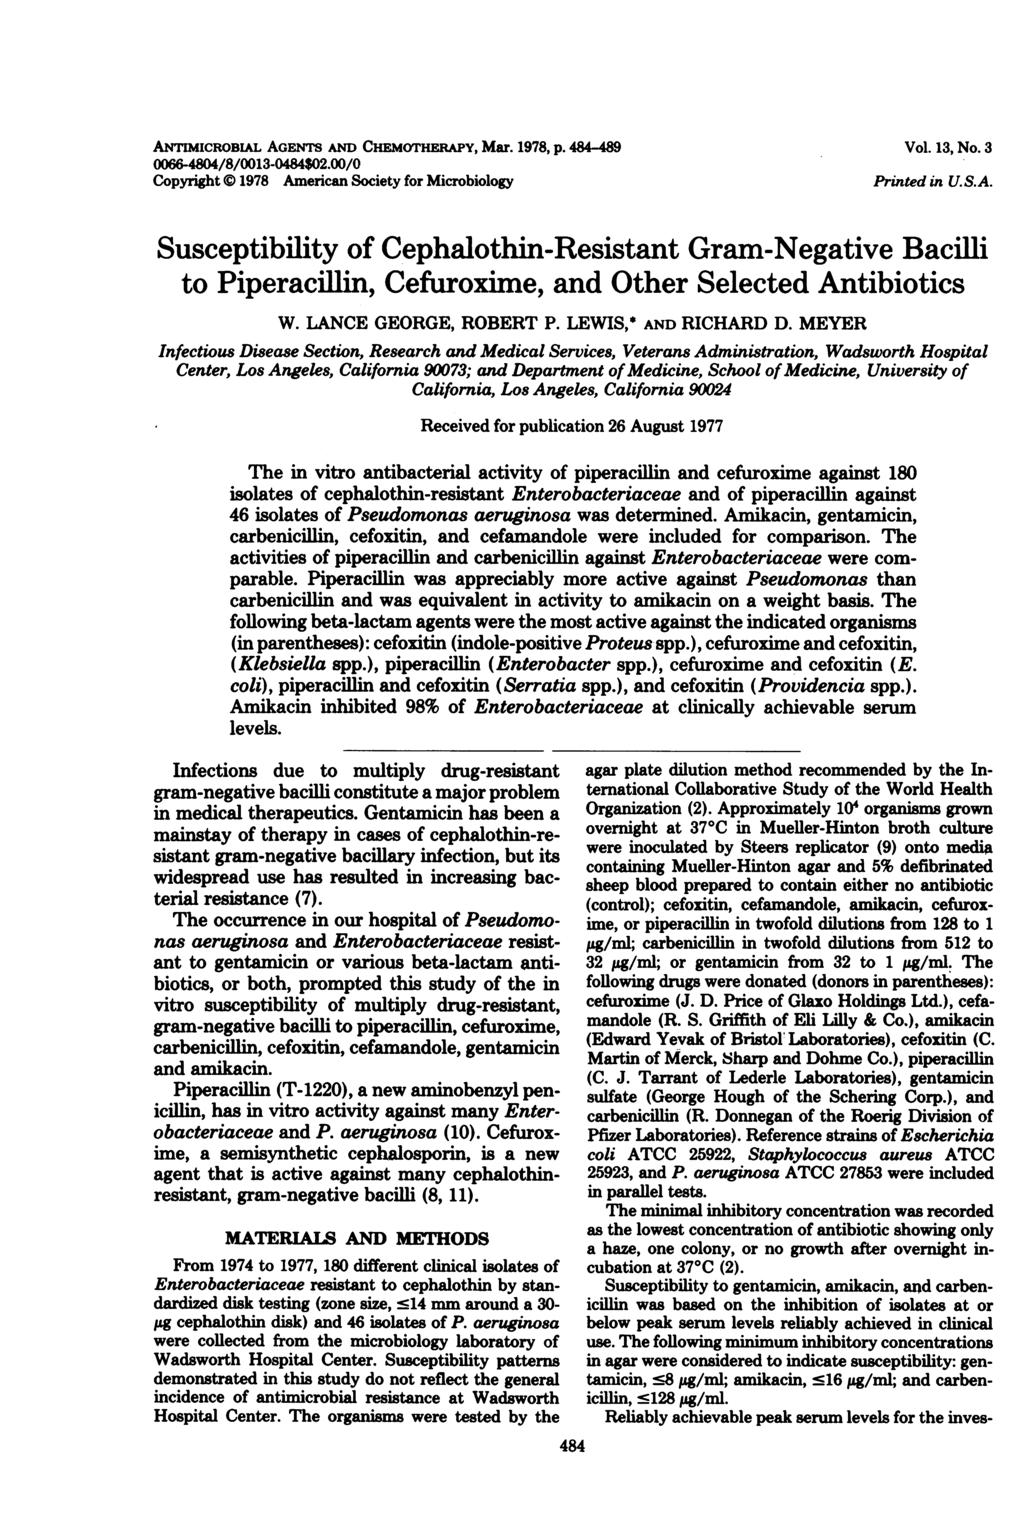 ANTIMICROBIAL AGENTS AND CHEmOTHERAPY, Mar. 1978, p. 484489 0066-4804/8/0013-0484$02.00/0 Copyright 1978 American Society for Microbiology Vol. 13, No. 3 Printed in U.S.A. Susceptibility of Cephalothin-Resistant Gram-Negative Bacilli to Piperacilin, Cefuroxime, and Other Selected Antibiotics W.